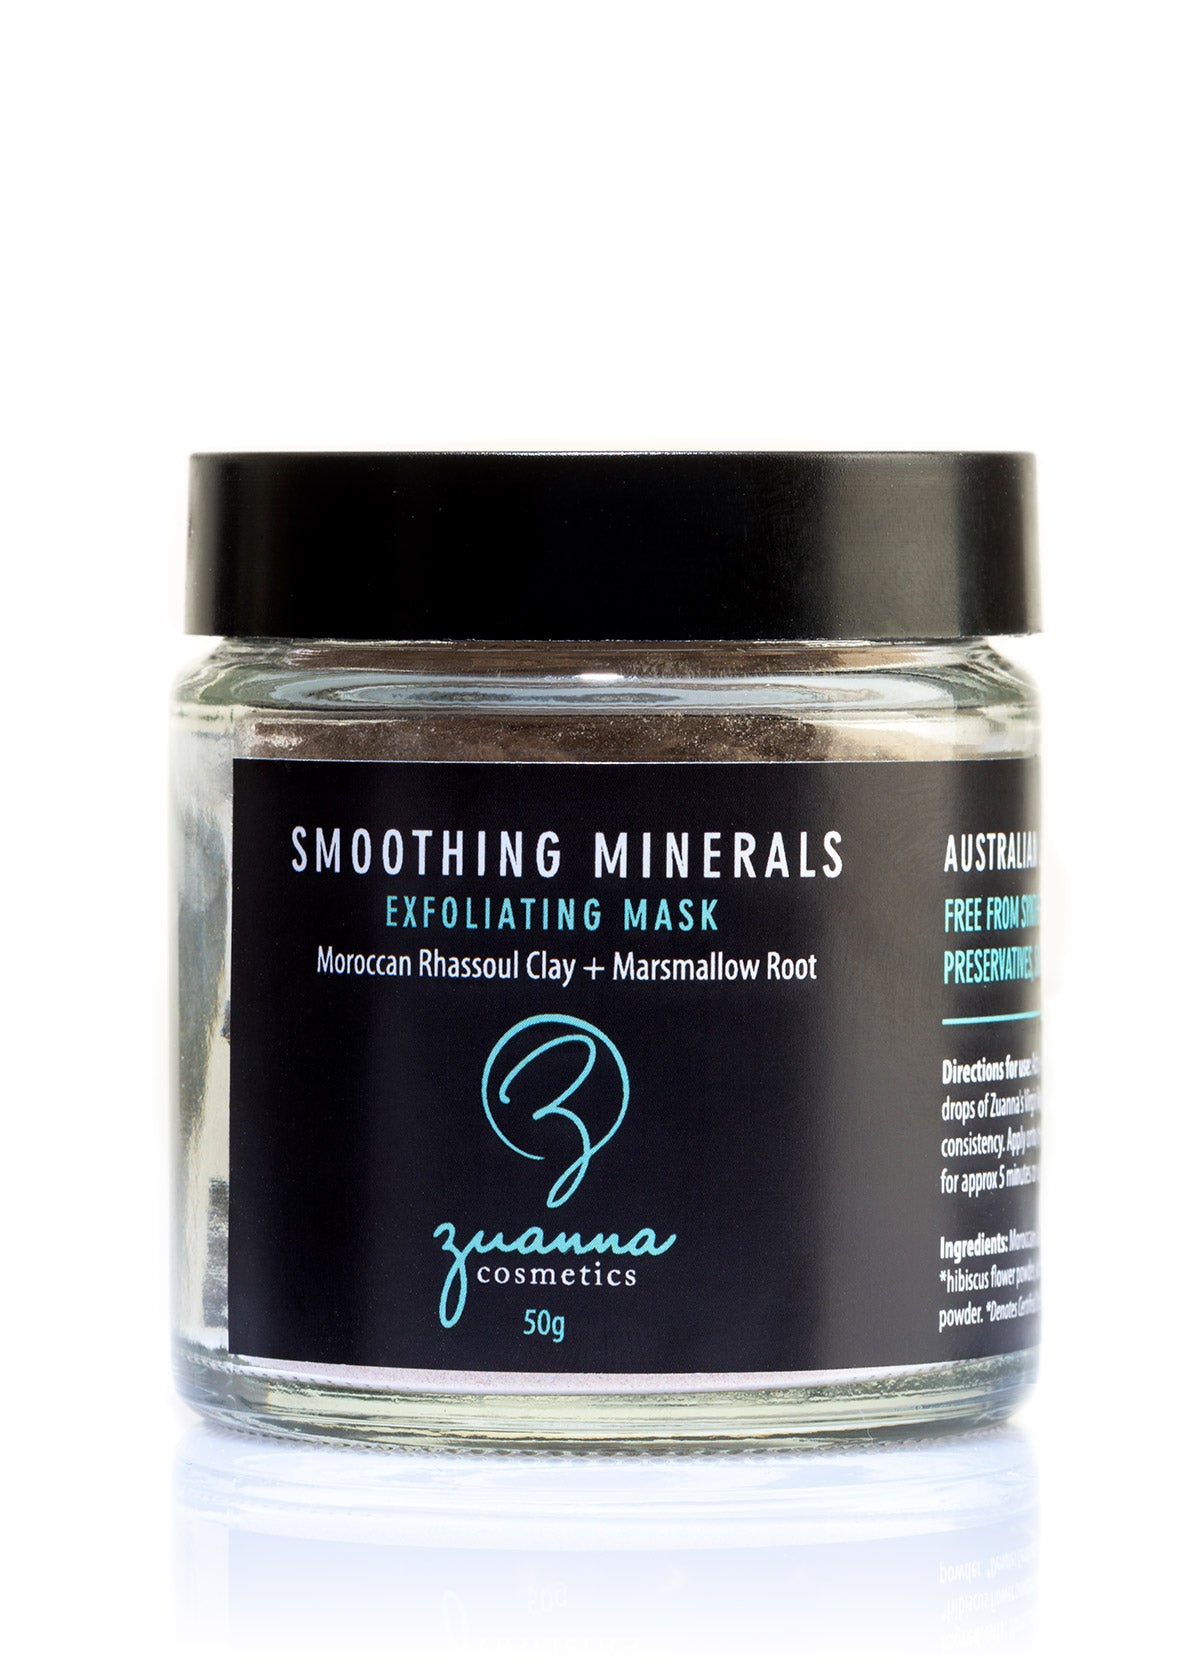 Smoothing Minerals Exfoliating Mask - Zuanna 